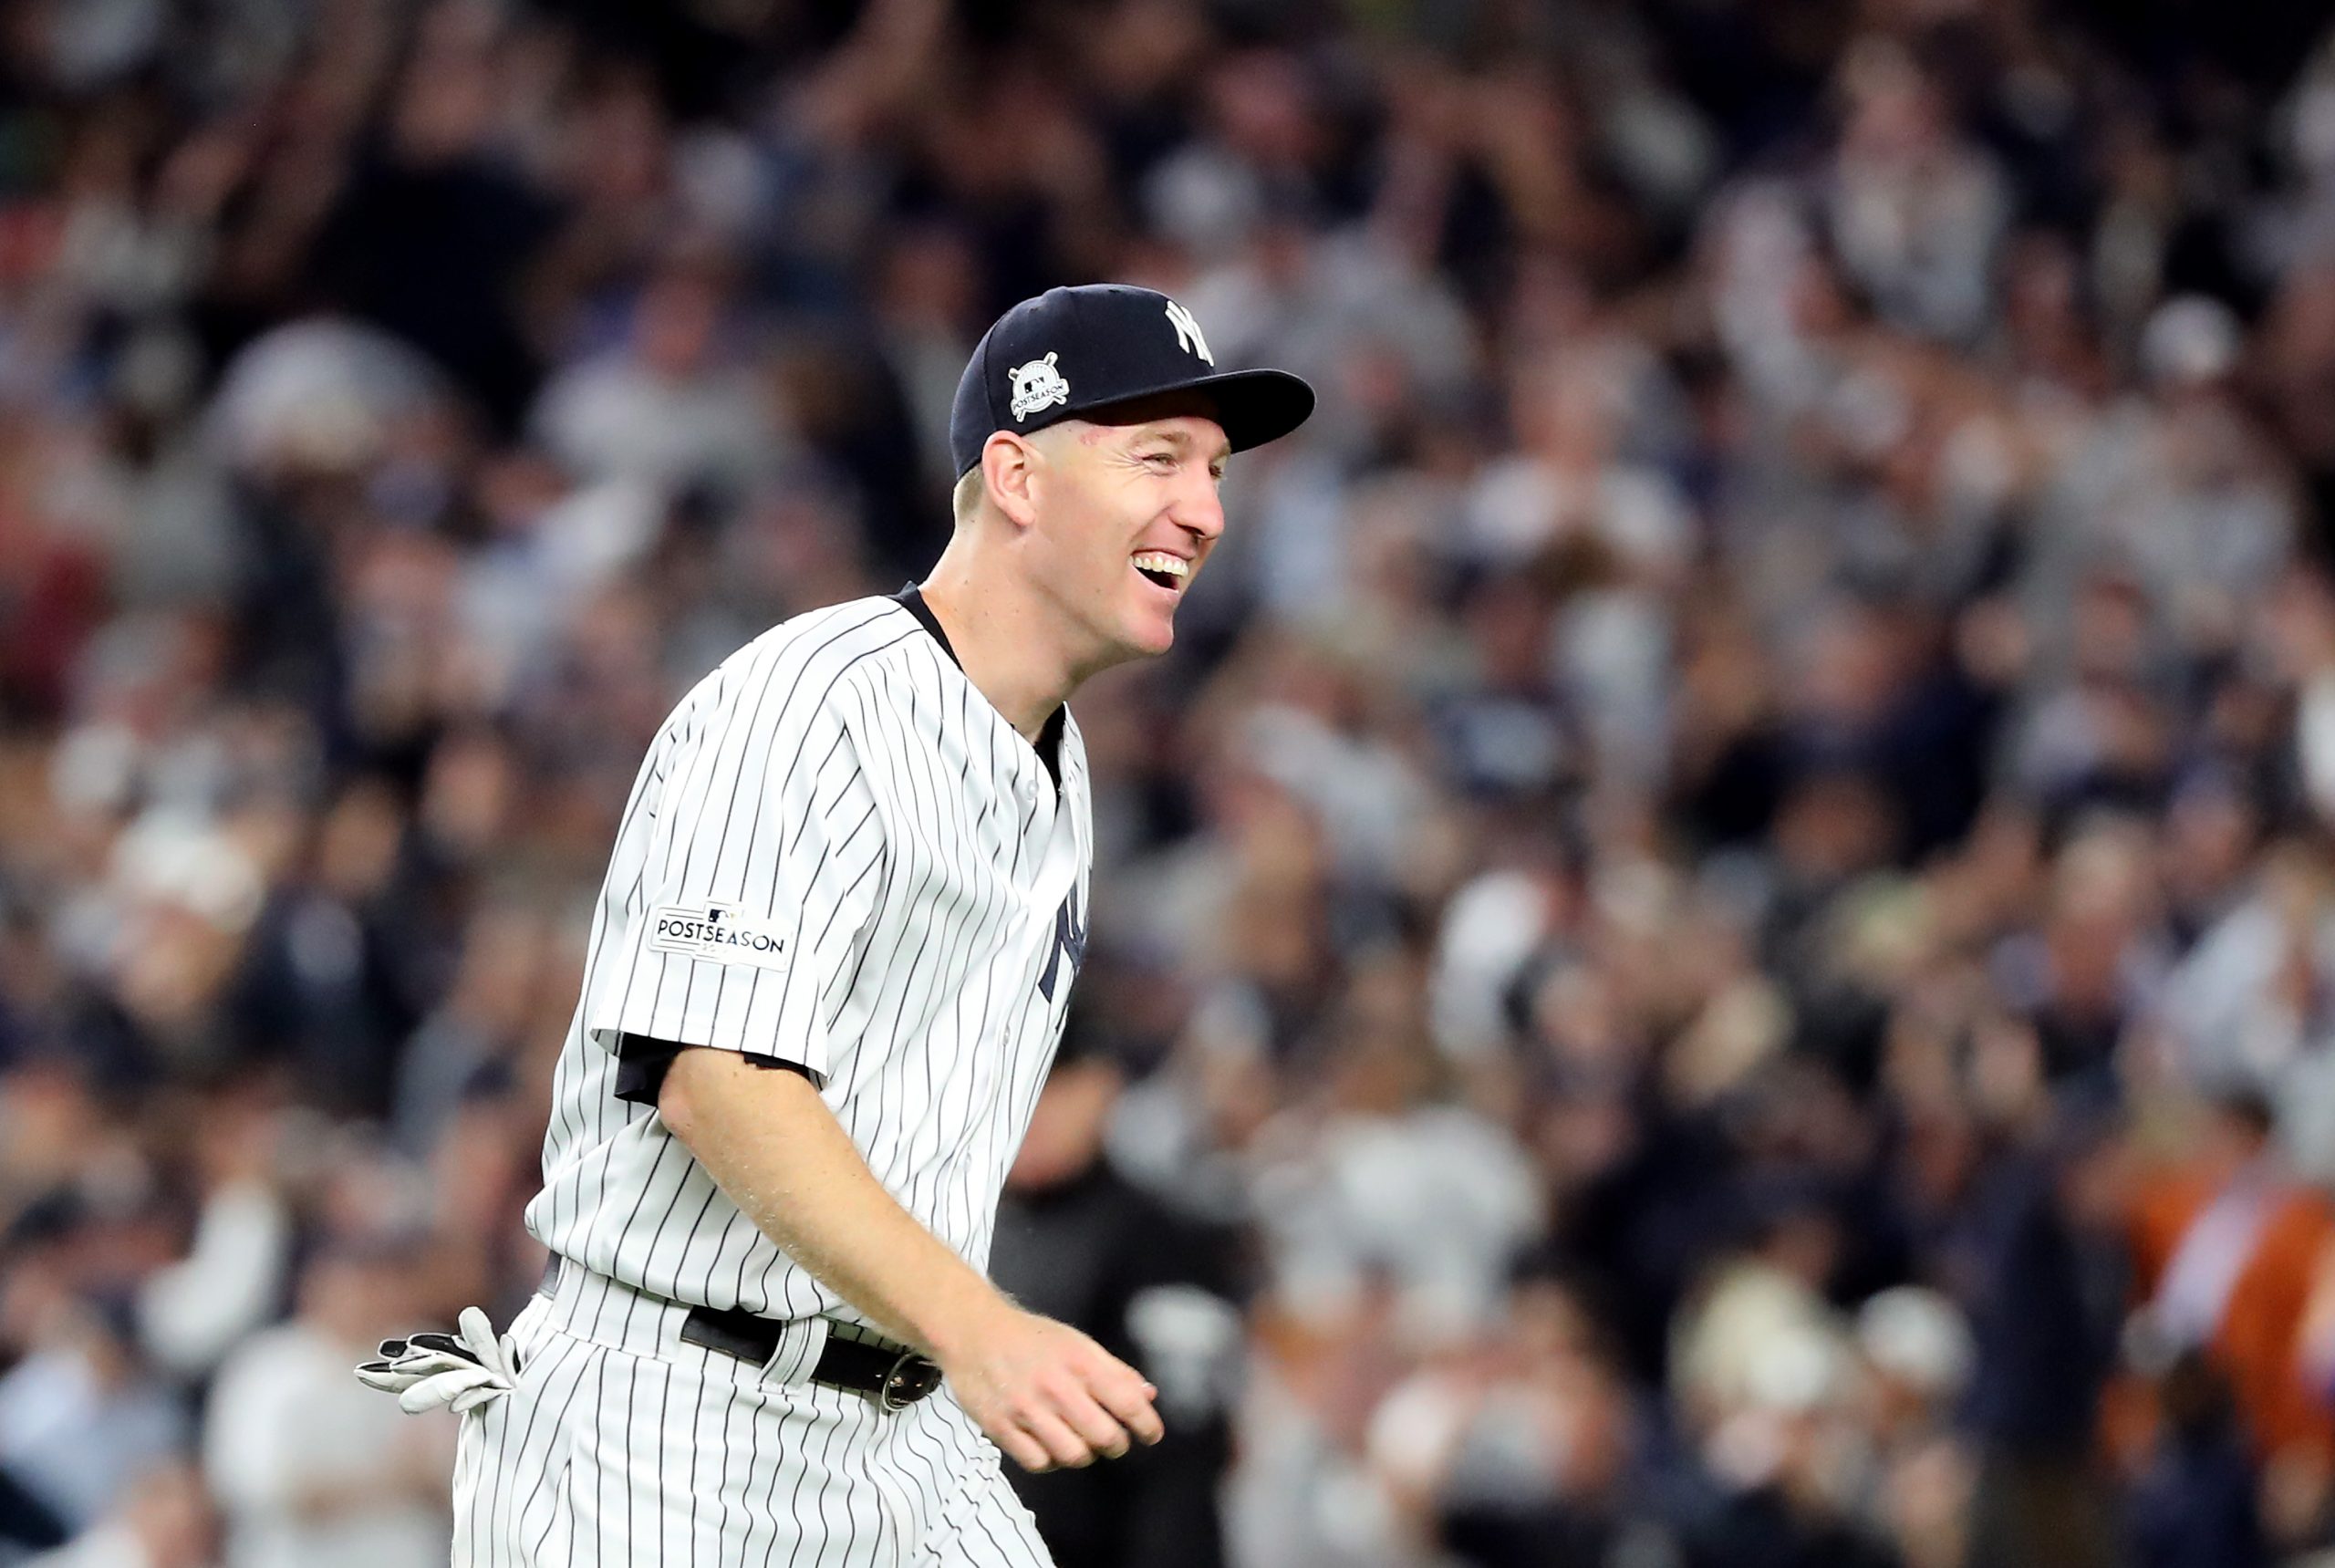 Todd Frazier's wife Jackie reacts to his MLB retirement